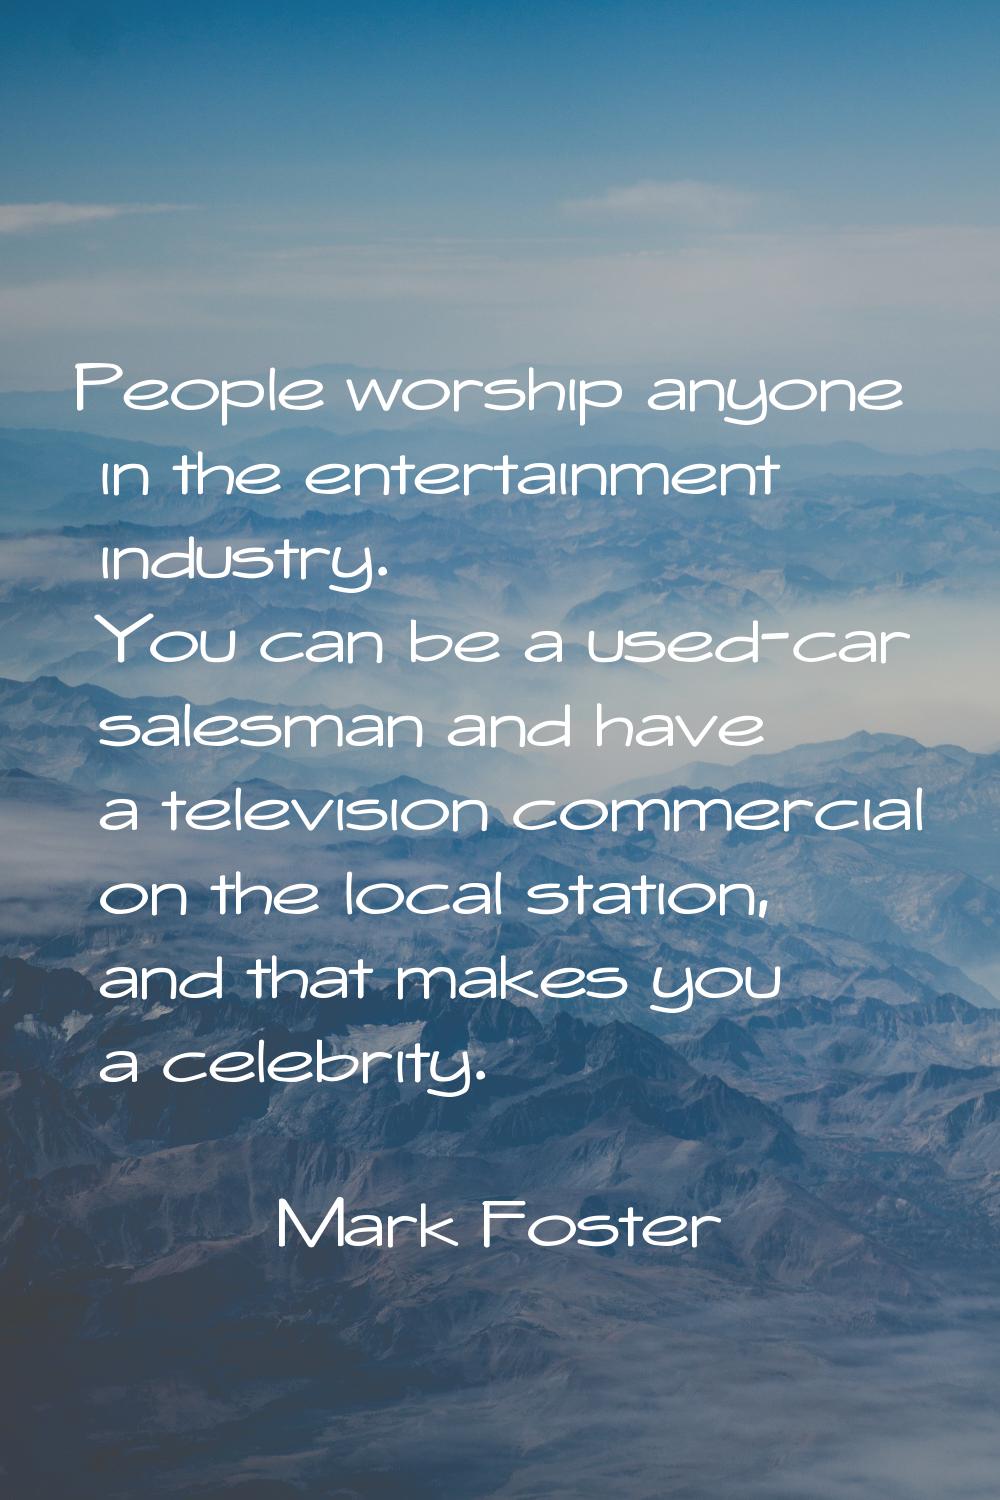 People worship anyone in the entertainment industry. You can be a used-car salesman and have a tele